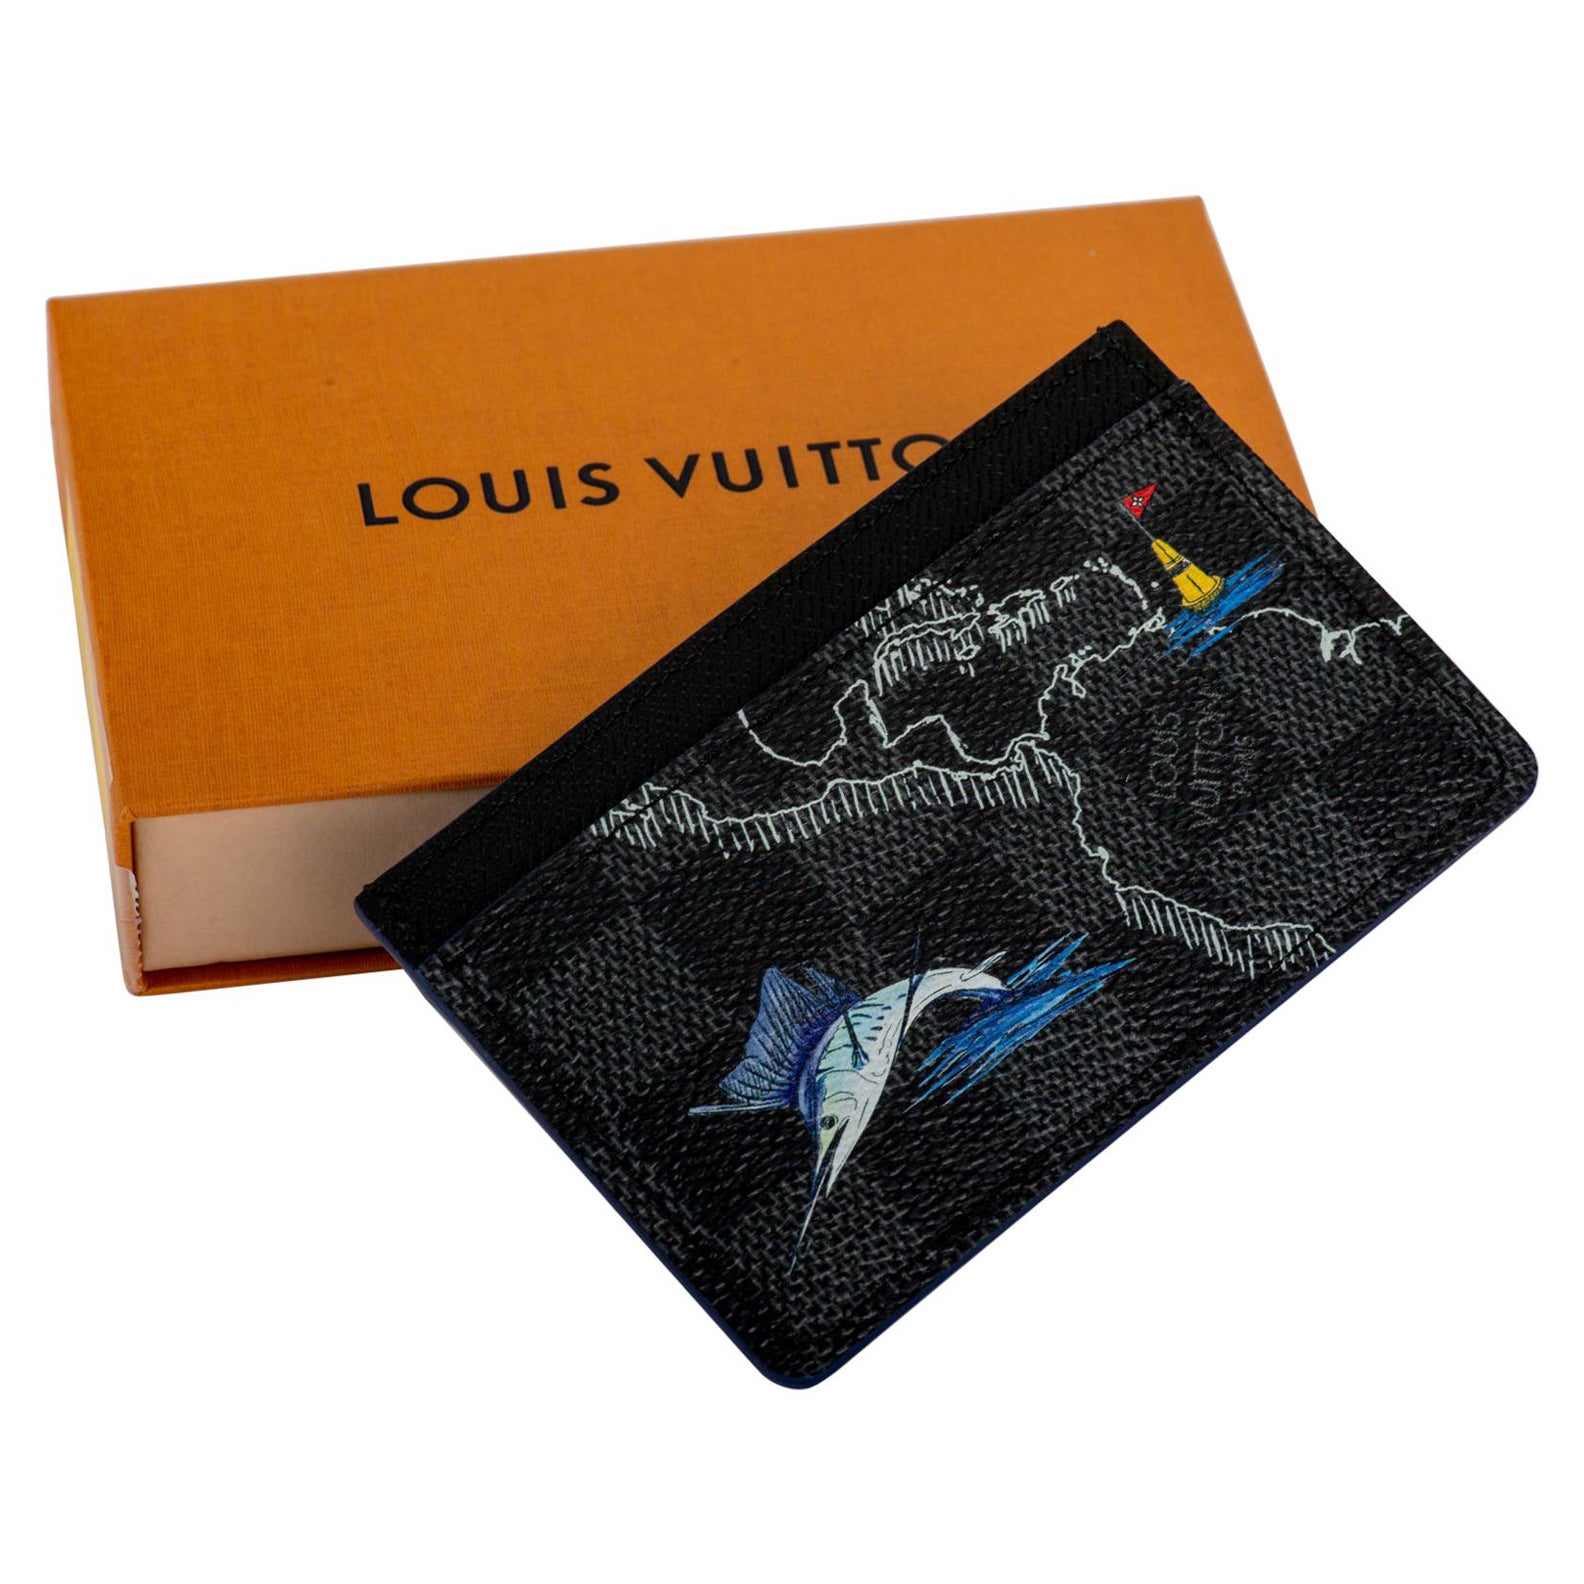 Louis Vuitton Map Wallet - 2 For Sale on 1stDibs